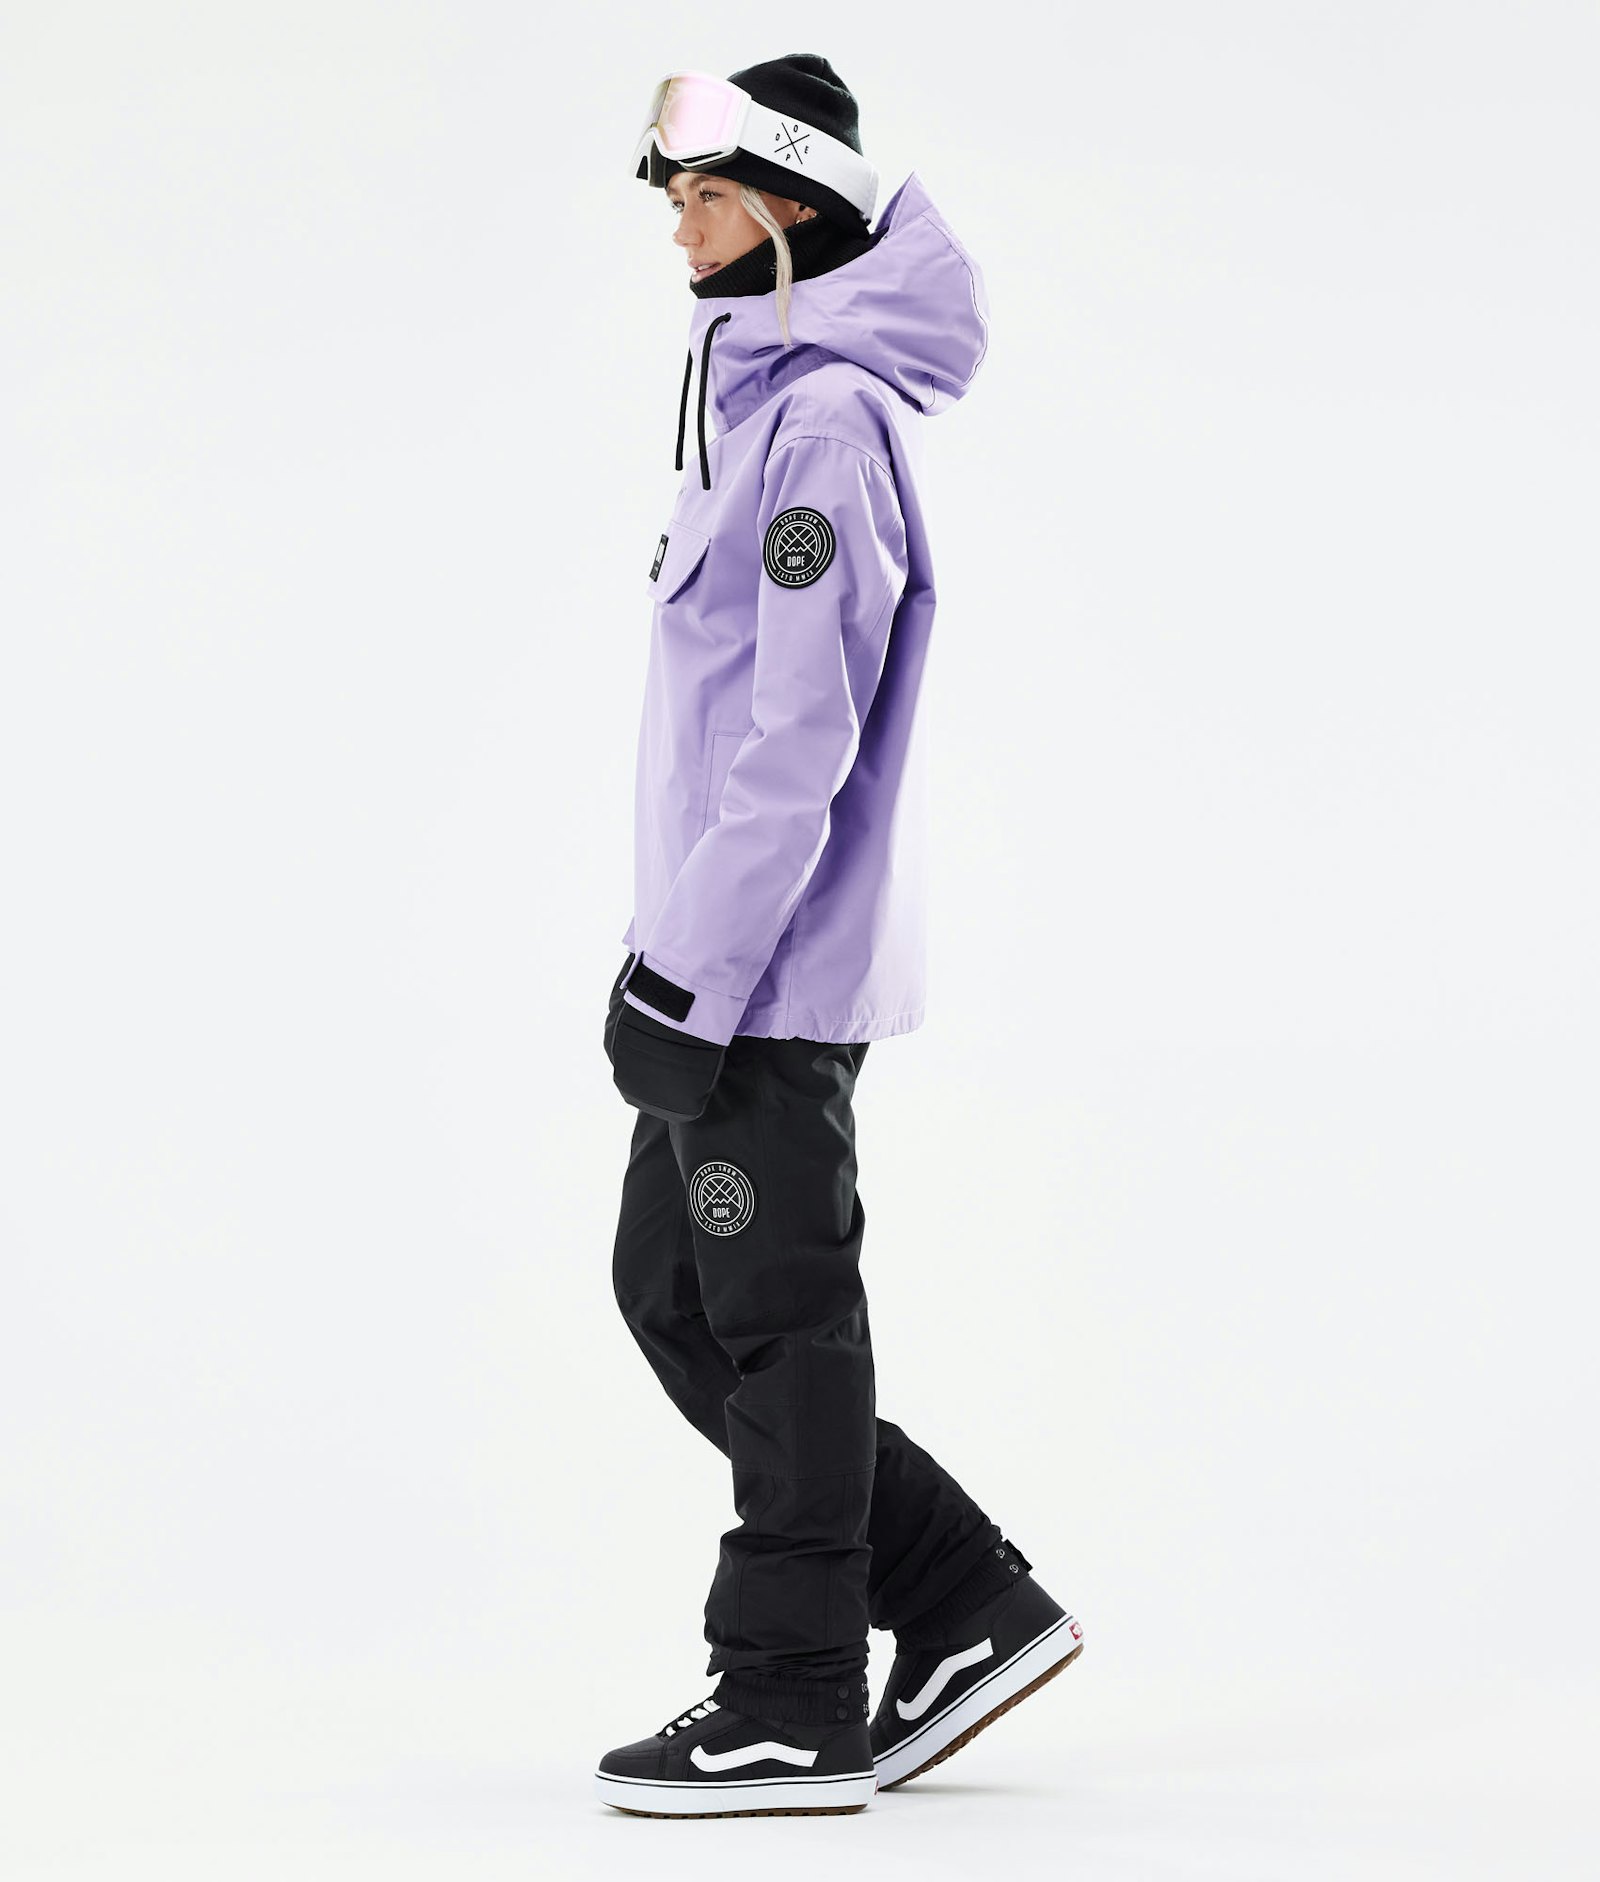 Dope Blizzard W 2021 Pantalones Snowboard Mujer Faded Violet - Lila